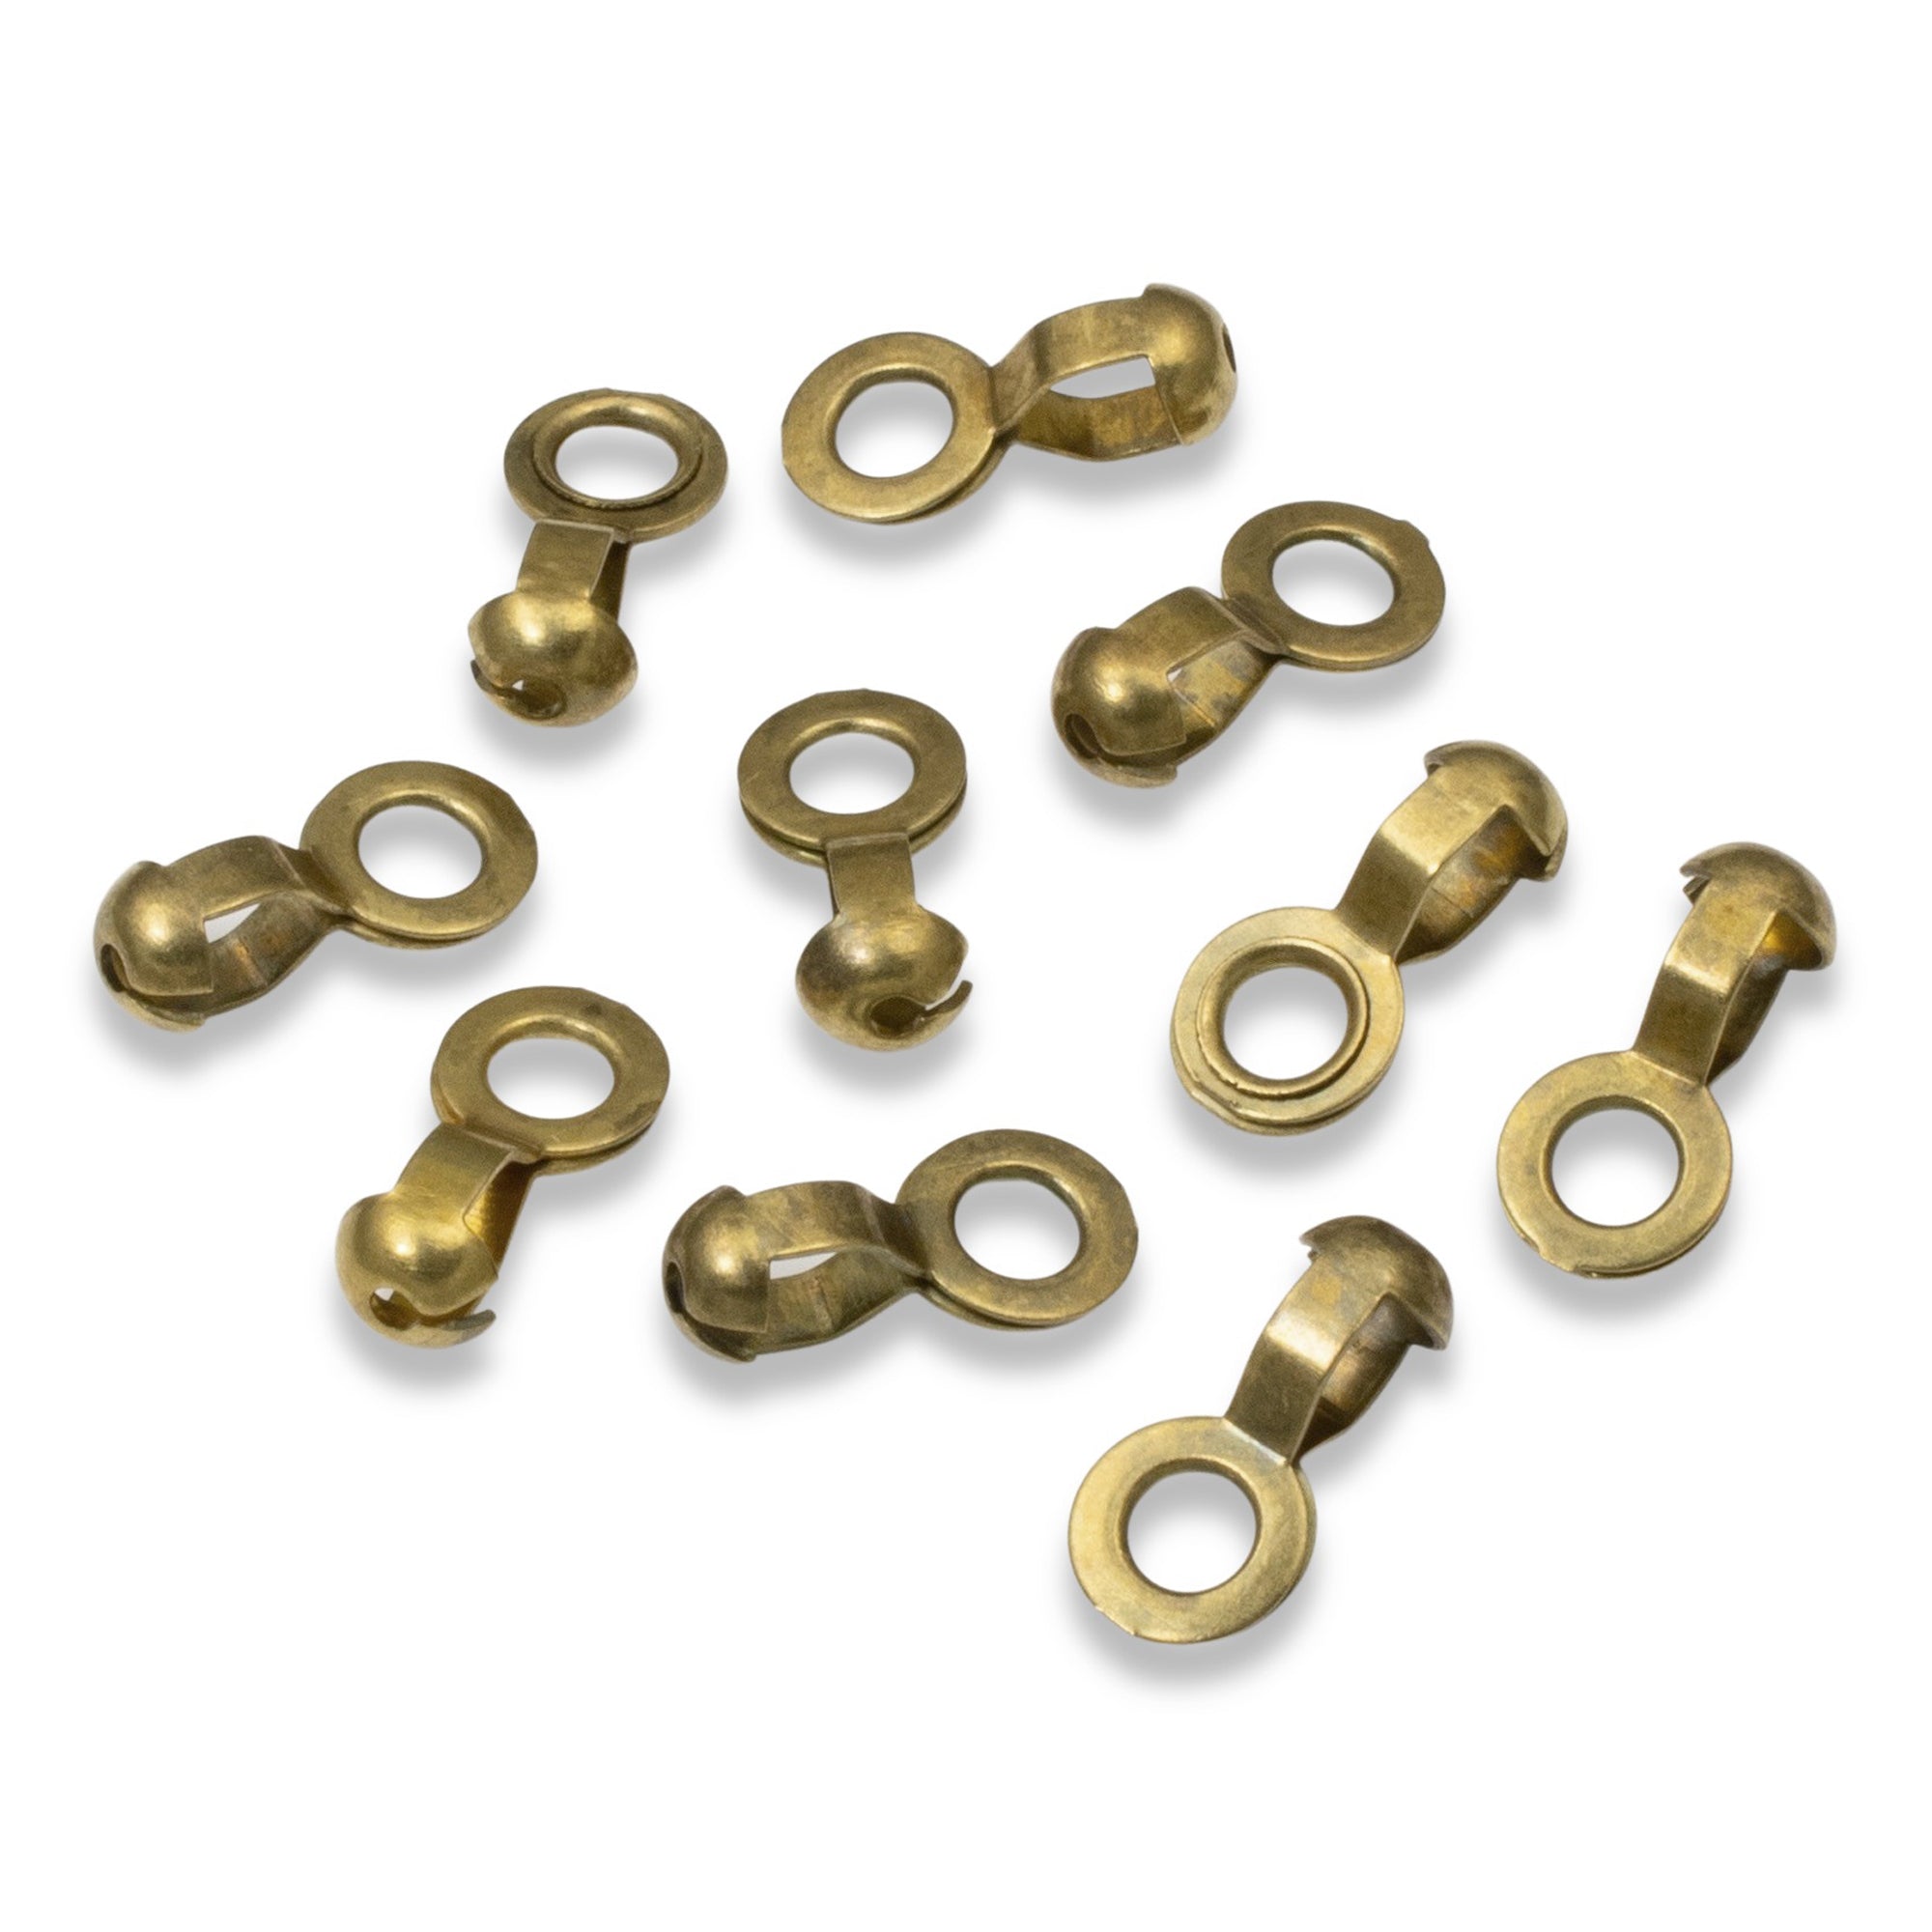 6 Stainless Steel End Ring Connectors - Ball Chain Manufacturing